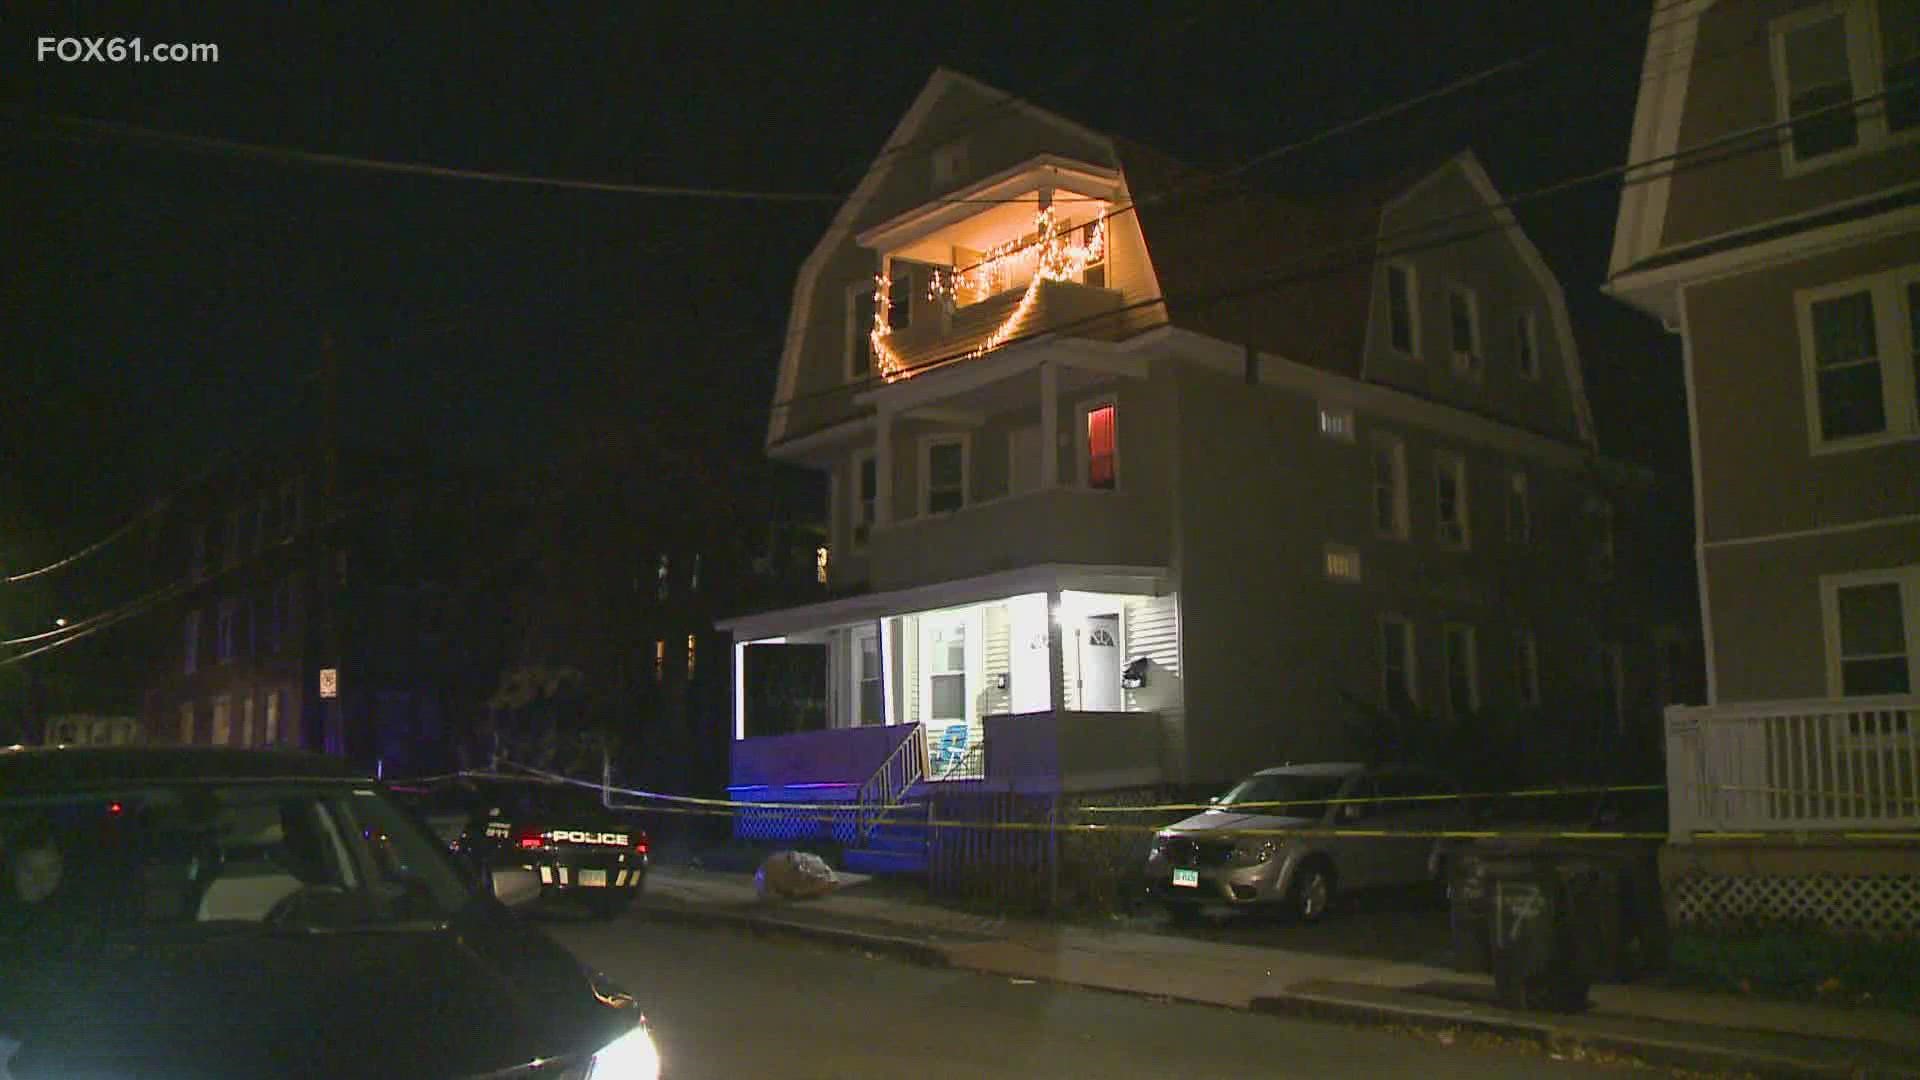 Officers were called to a three-family home on Barker Street just before 1 a.m. on the report of a shooting.